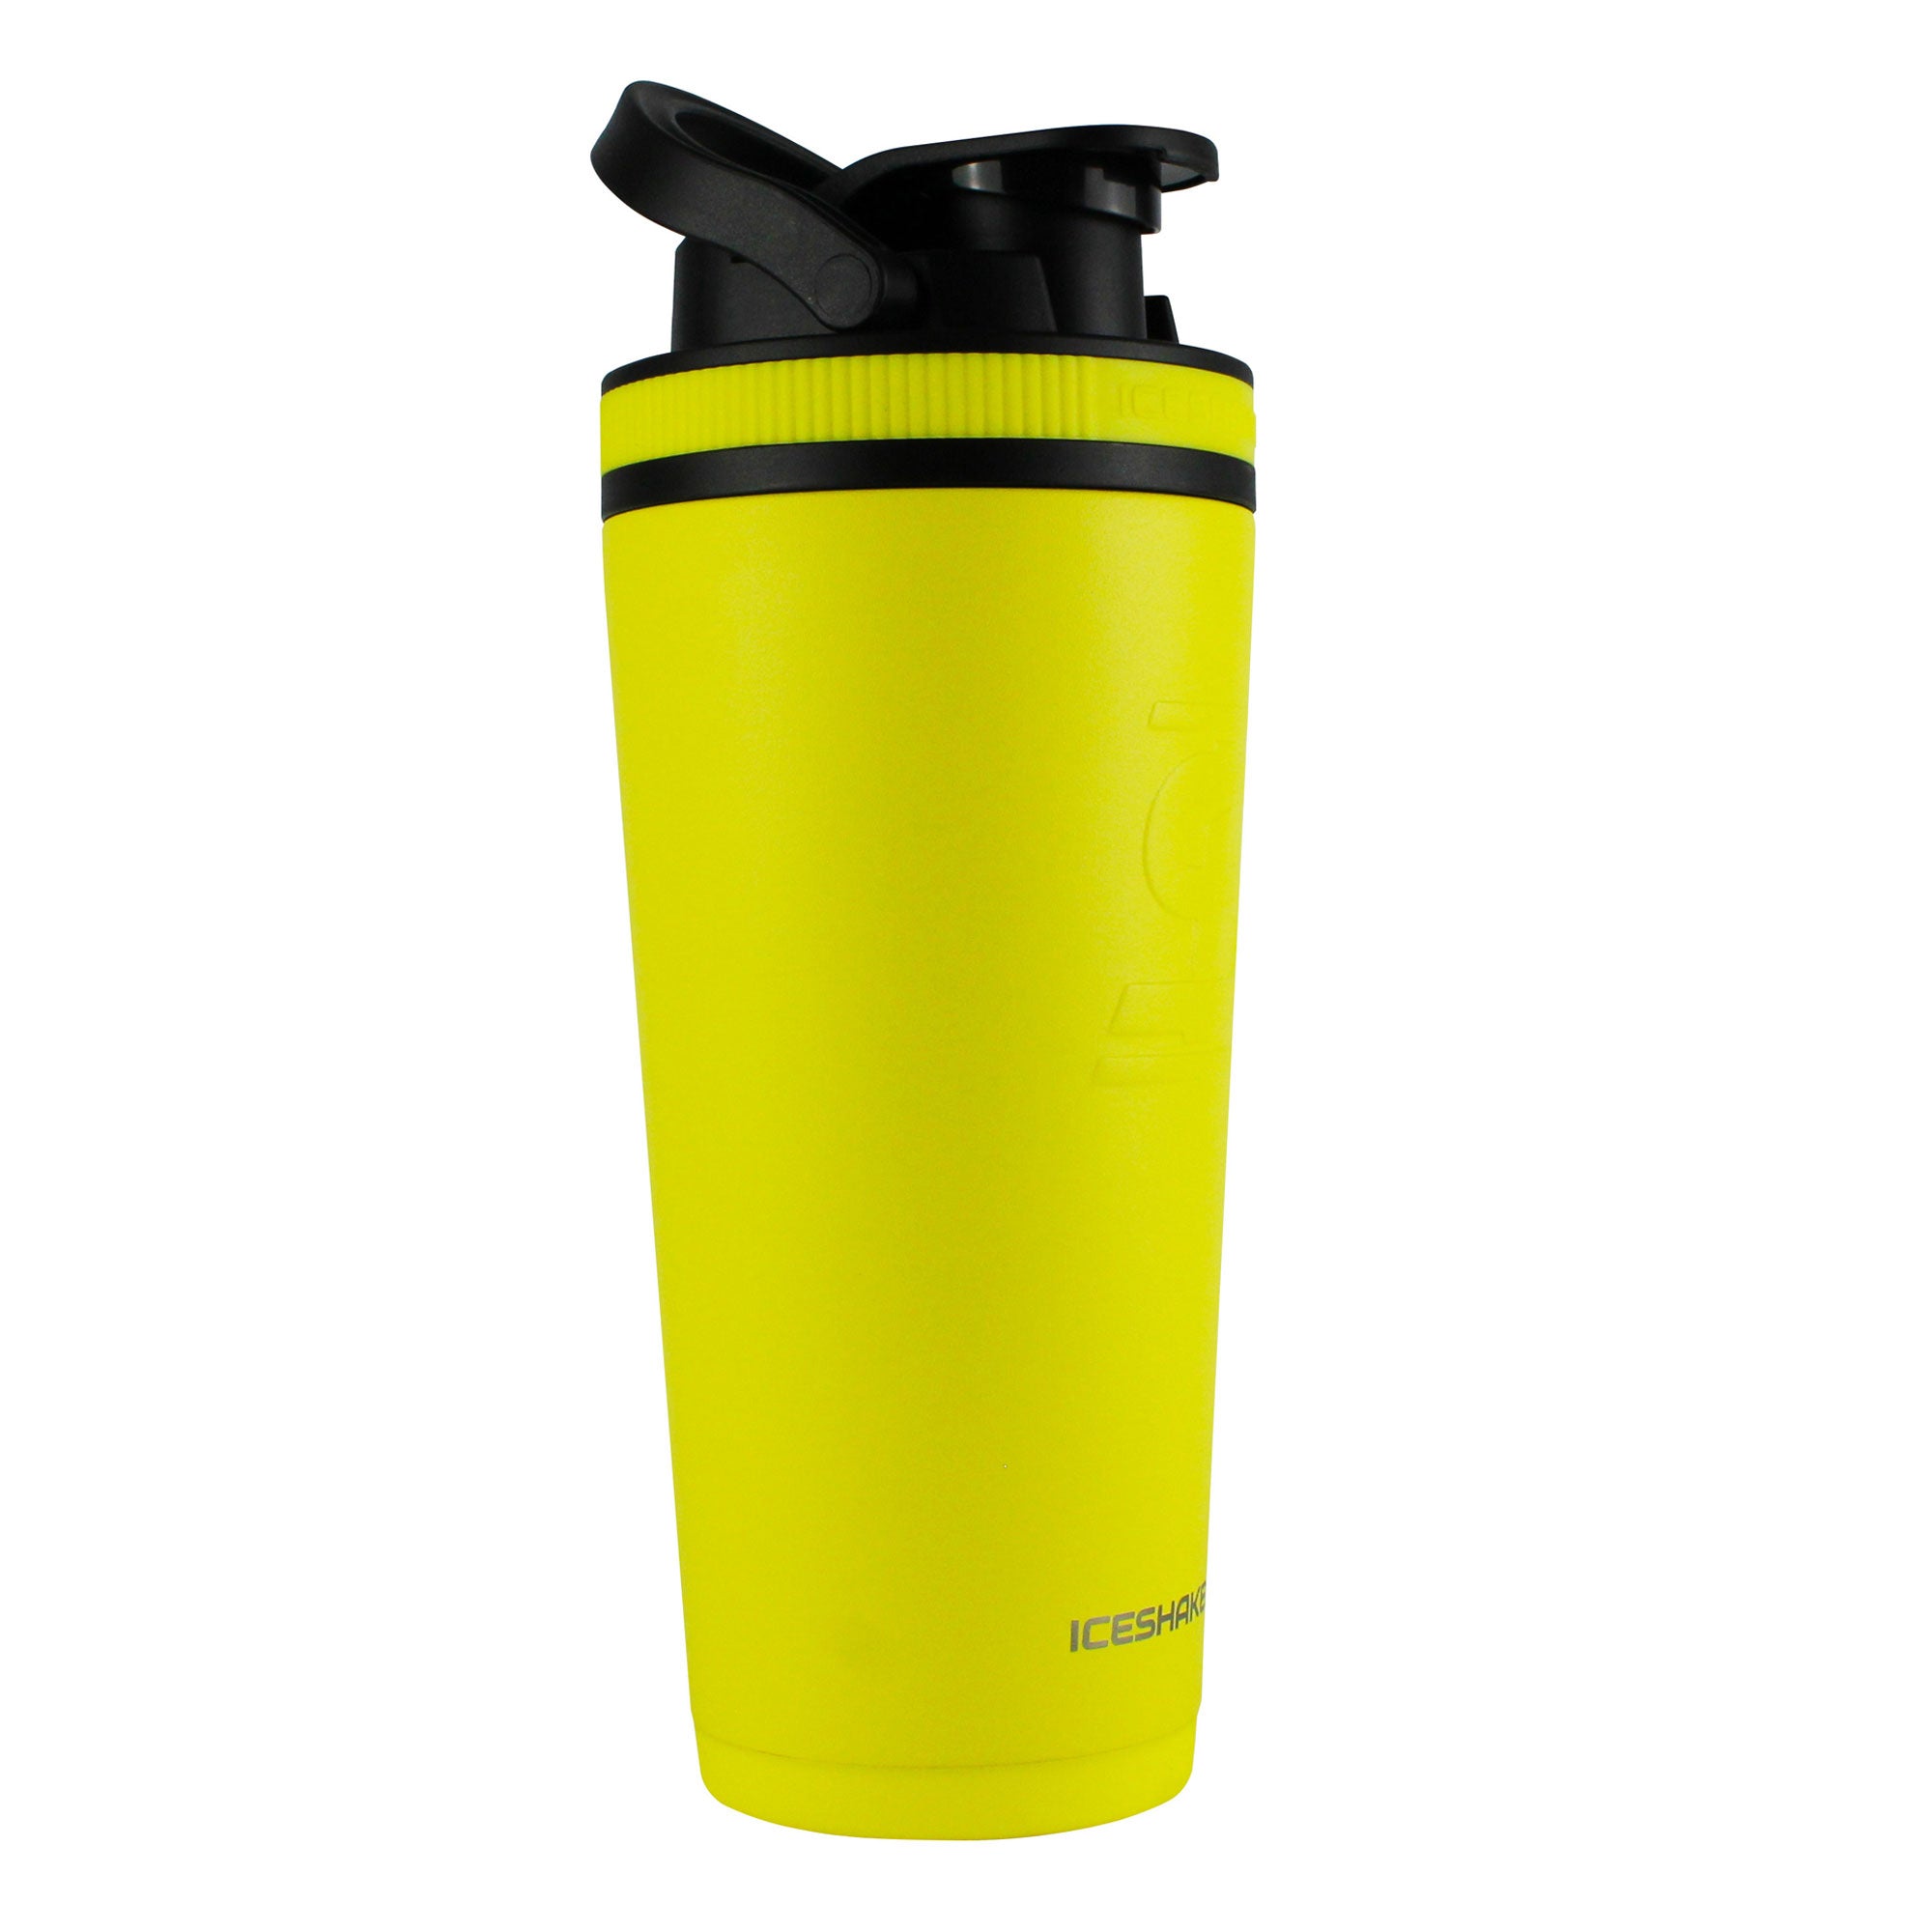 Officially Licensed Pittsburgh Penguins 26oz Ice Shaker - Yellow